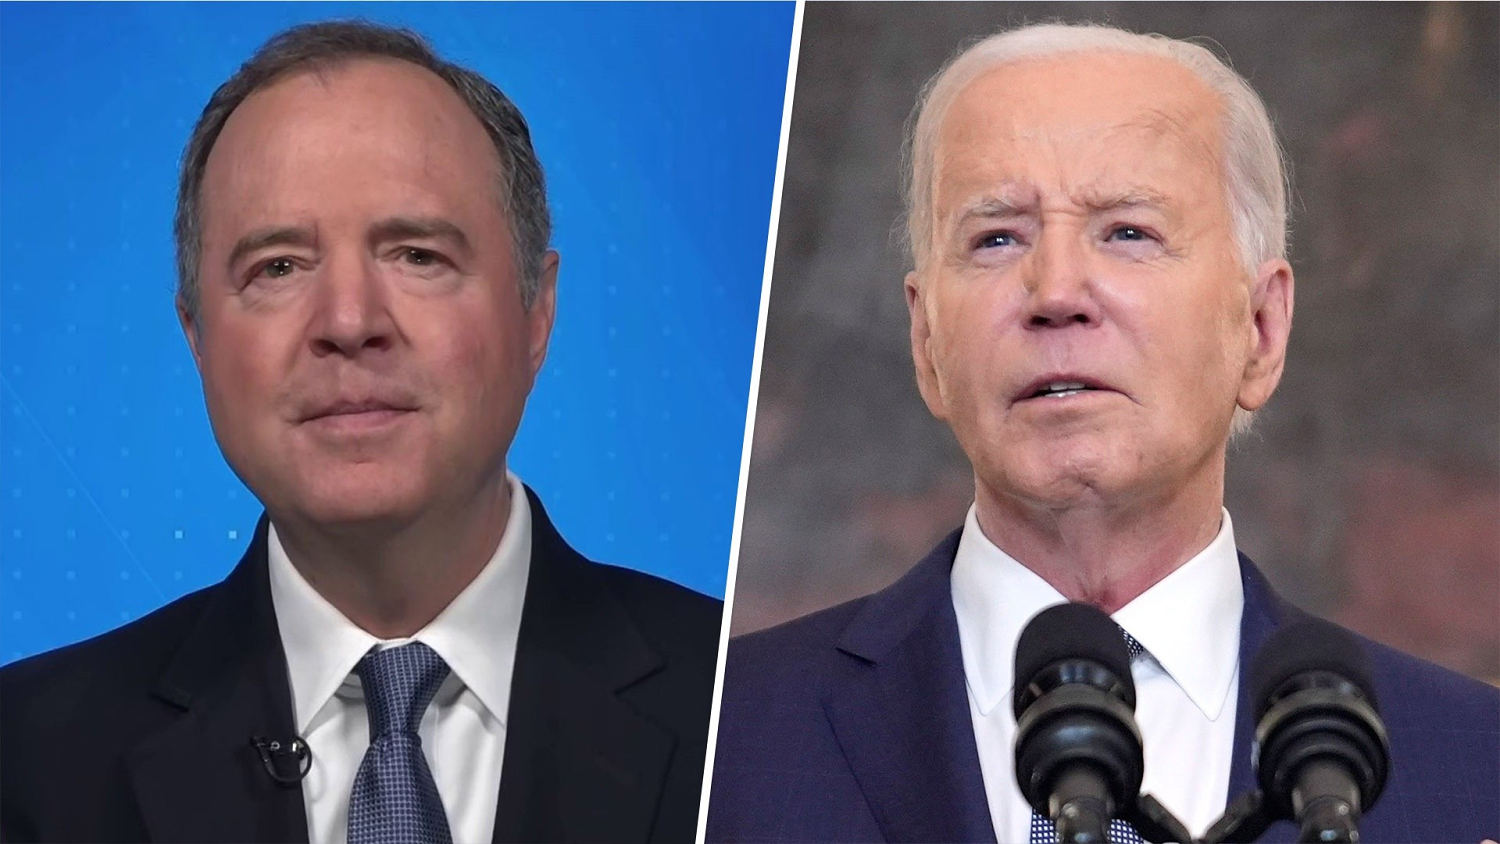 Rep. Adam Schiff: Biden 'put country first' by dropping out of race